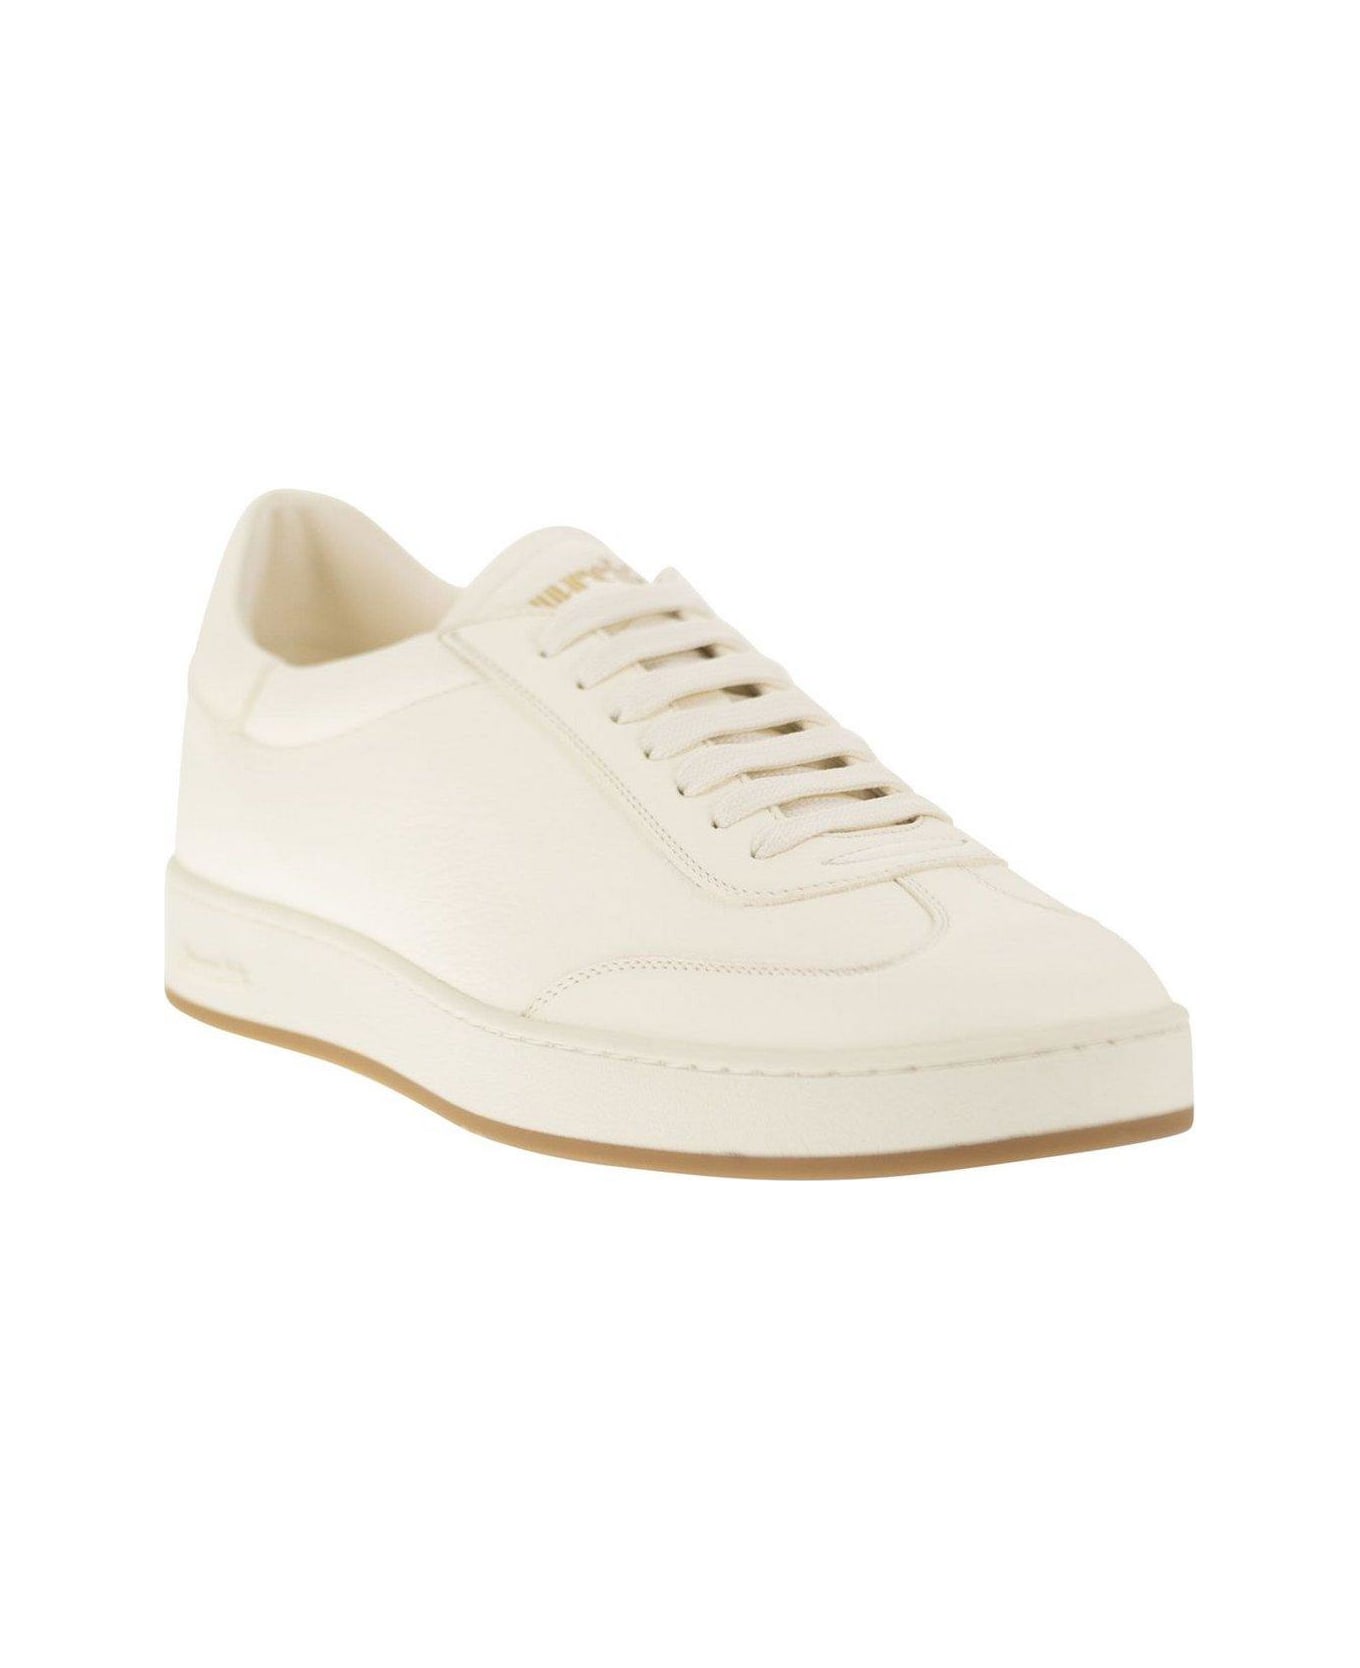 Church's Logo Printed Lace-up Sneakers - Ivory